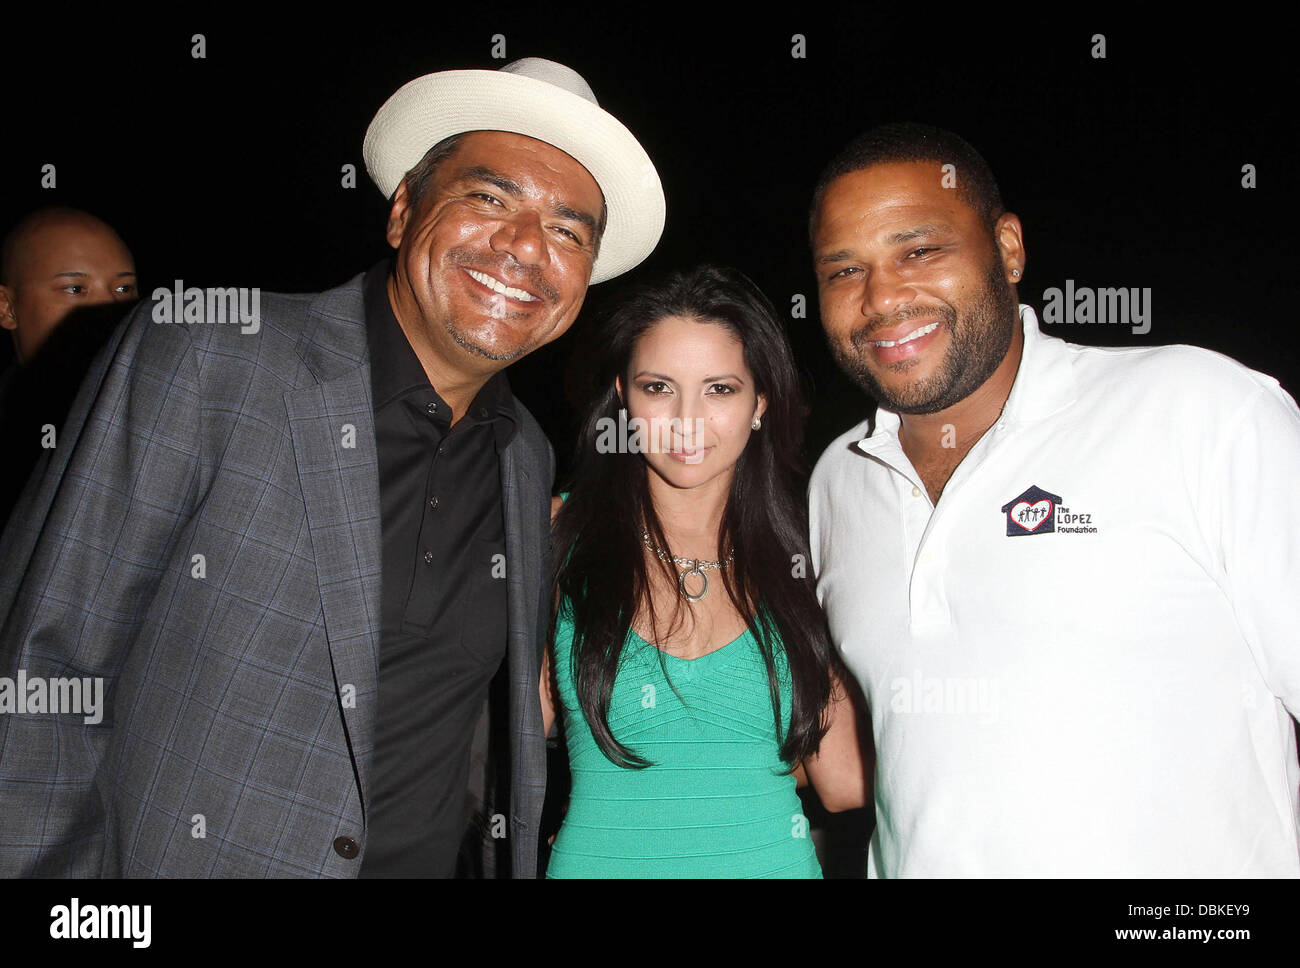 George Lopez, Cindy Vela, Anthony Anderson,  The Lopez Foundation celebrates 4th of July with fireworks and a salute to our troops held at the CBS Studios Studio City, California - 04.07.11 Stock Photo